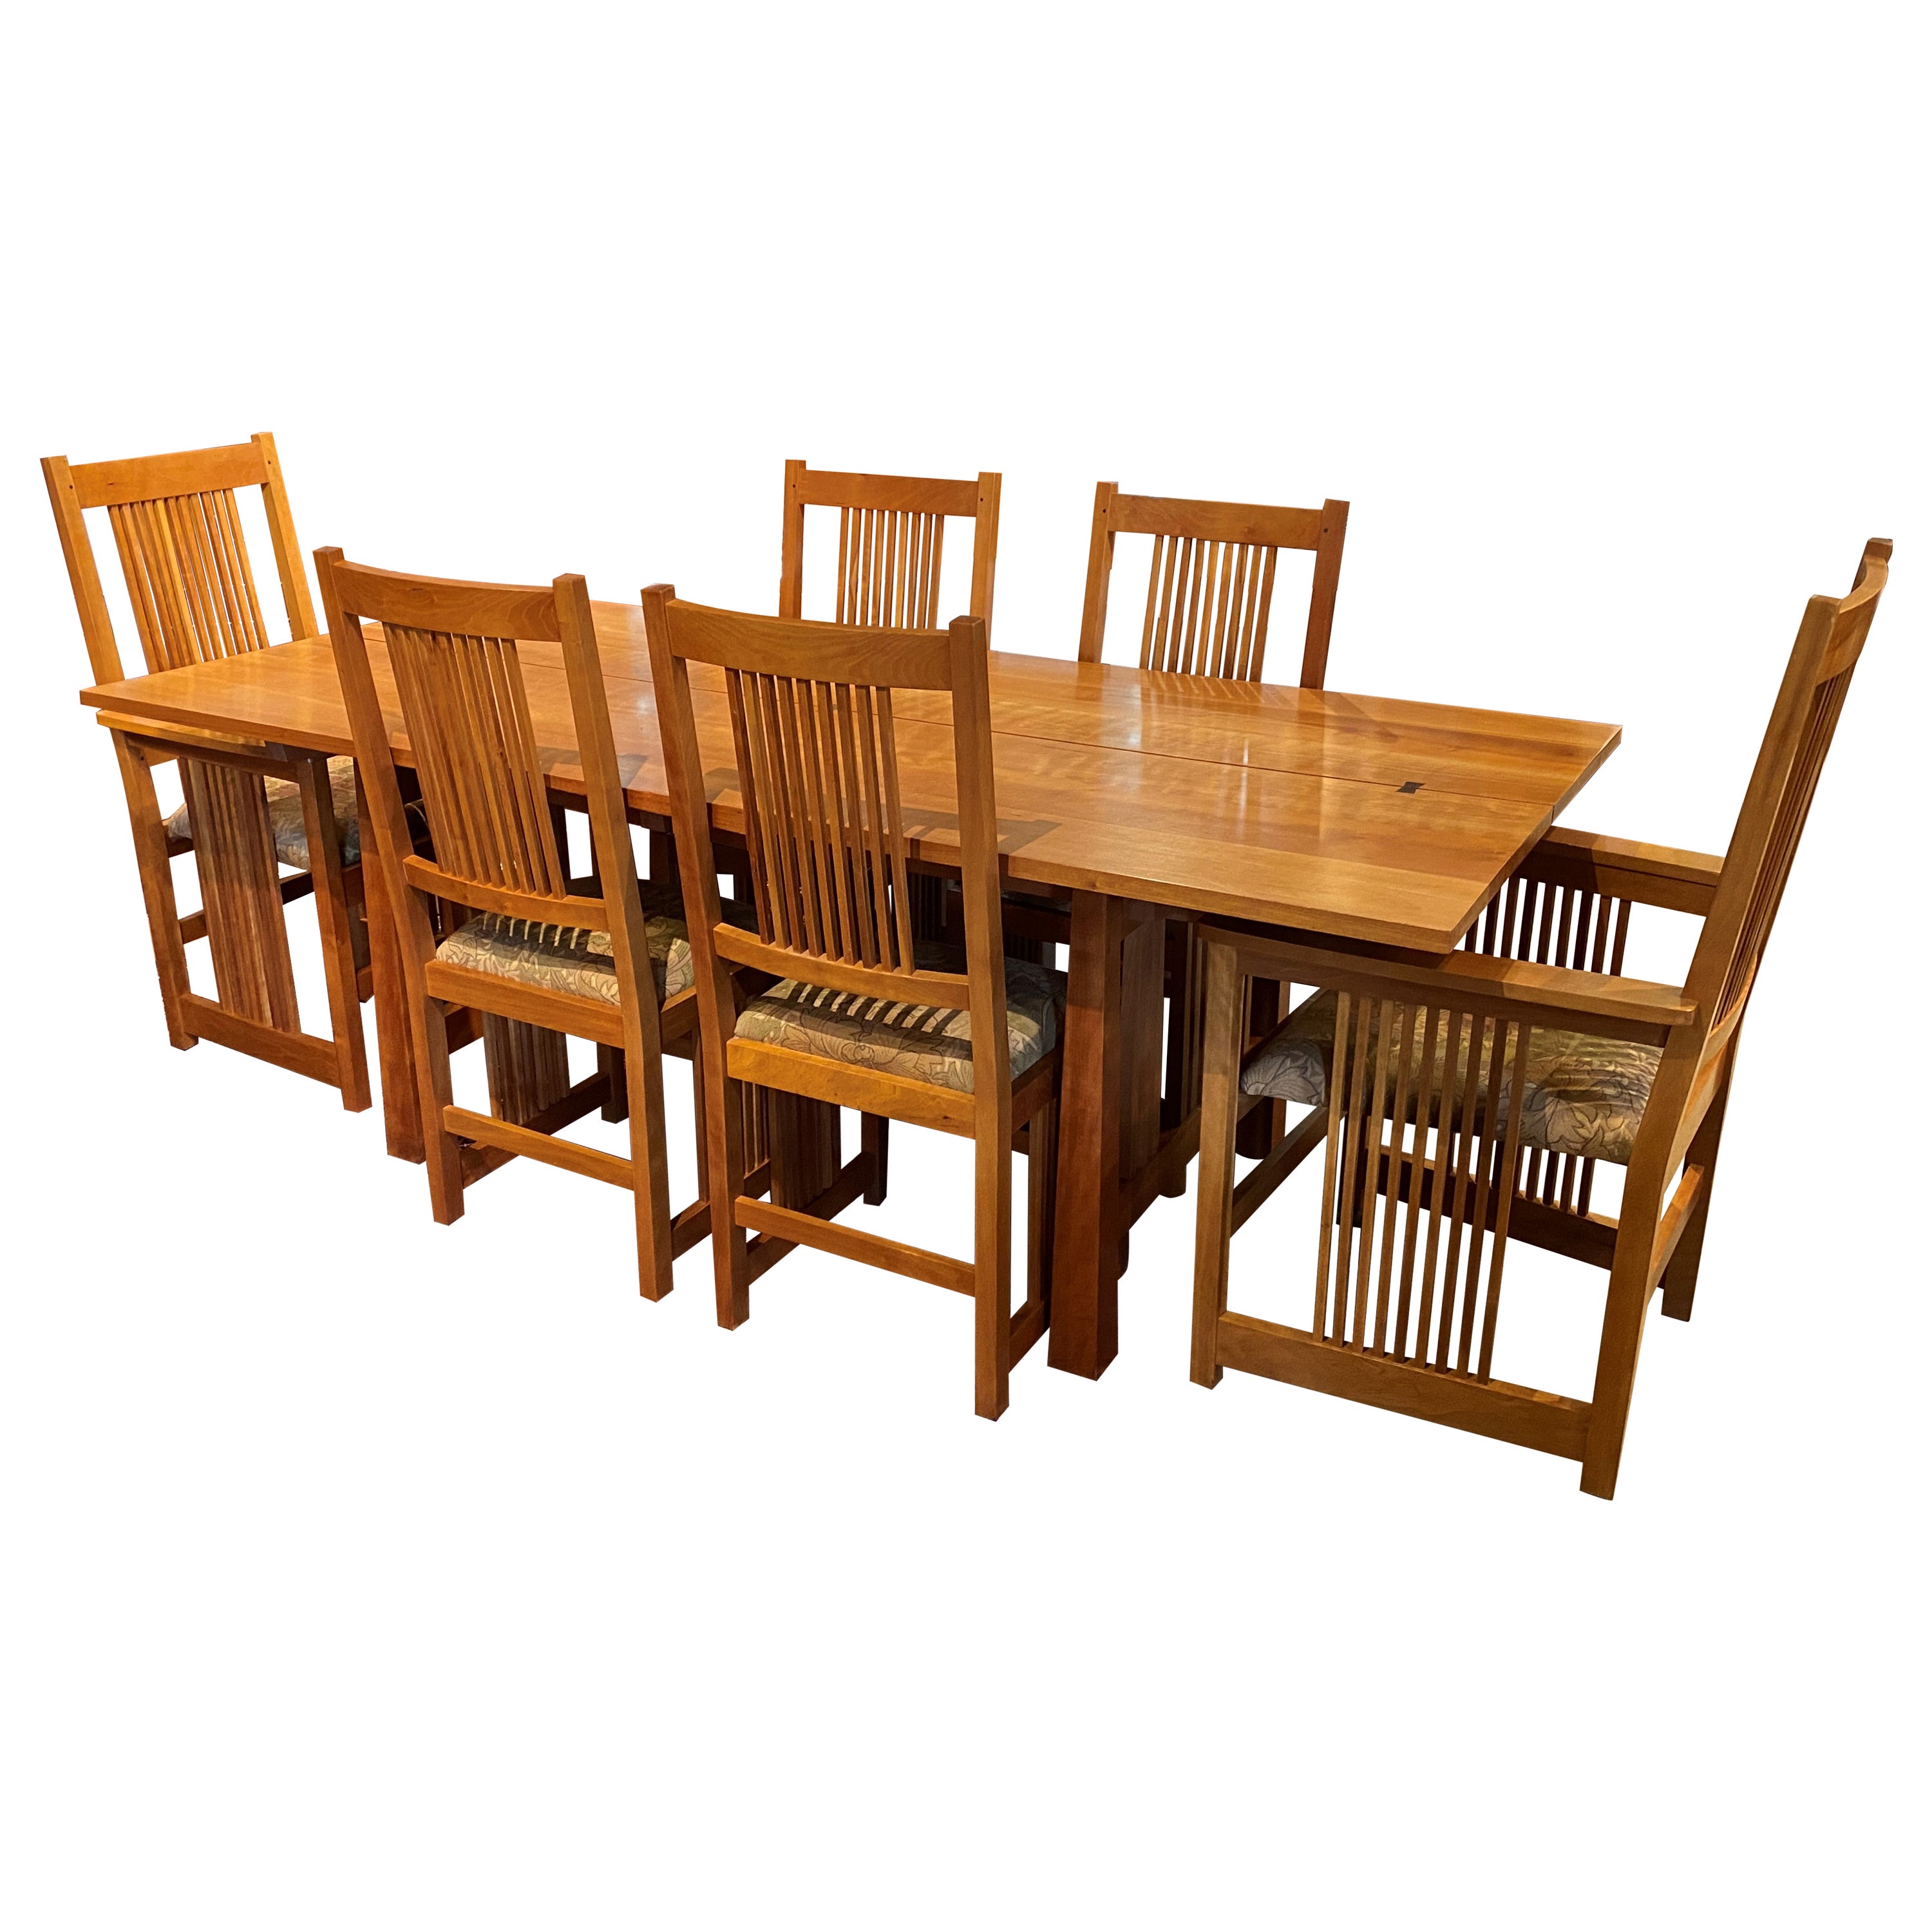 William Laberge Vermont Cherry Arts & Crafts Style Dining Table with Six Chairs